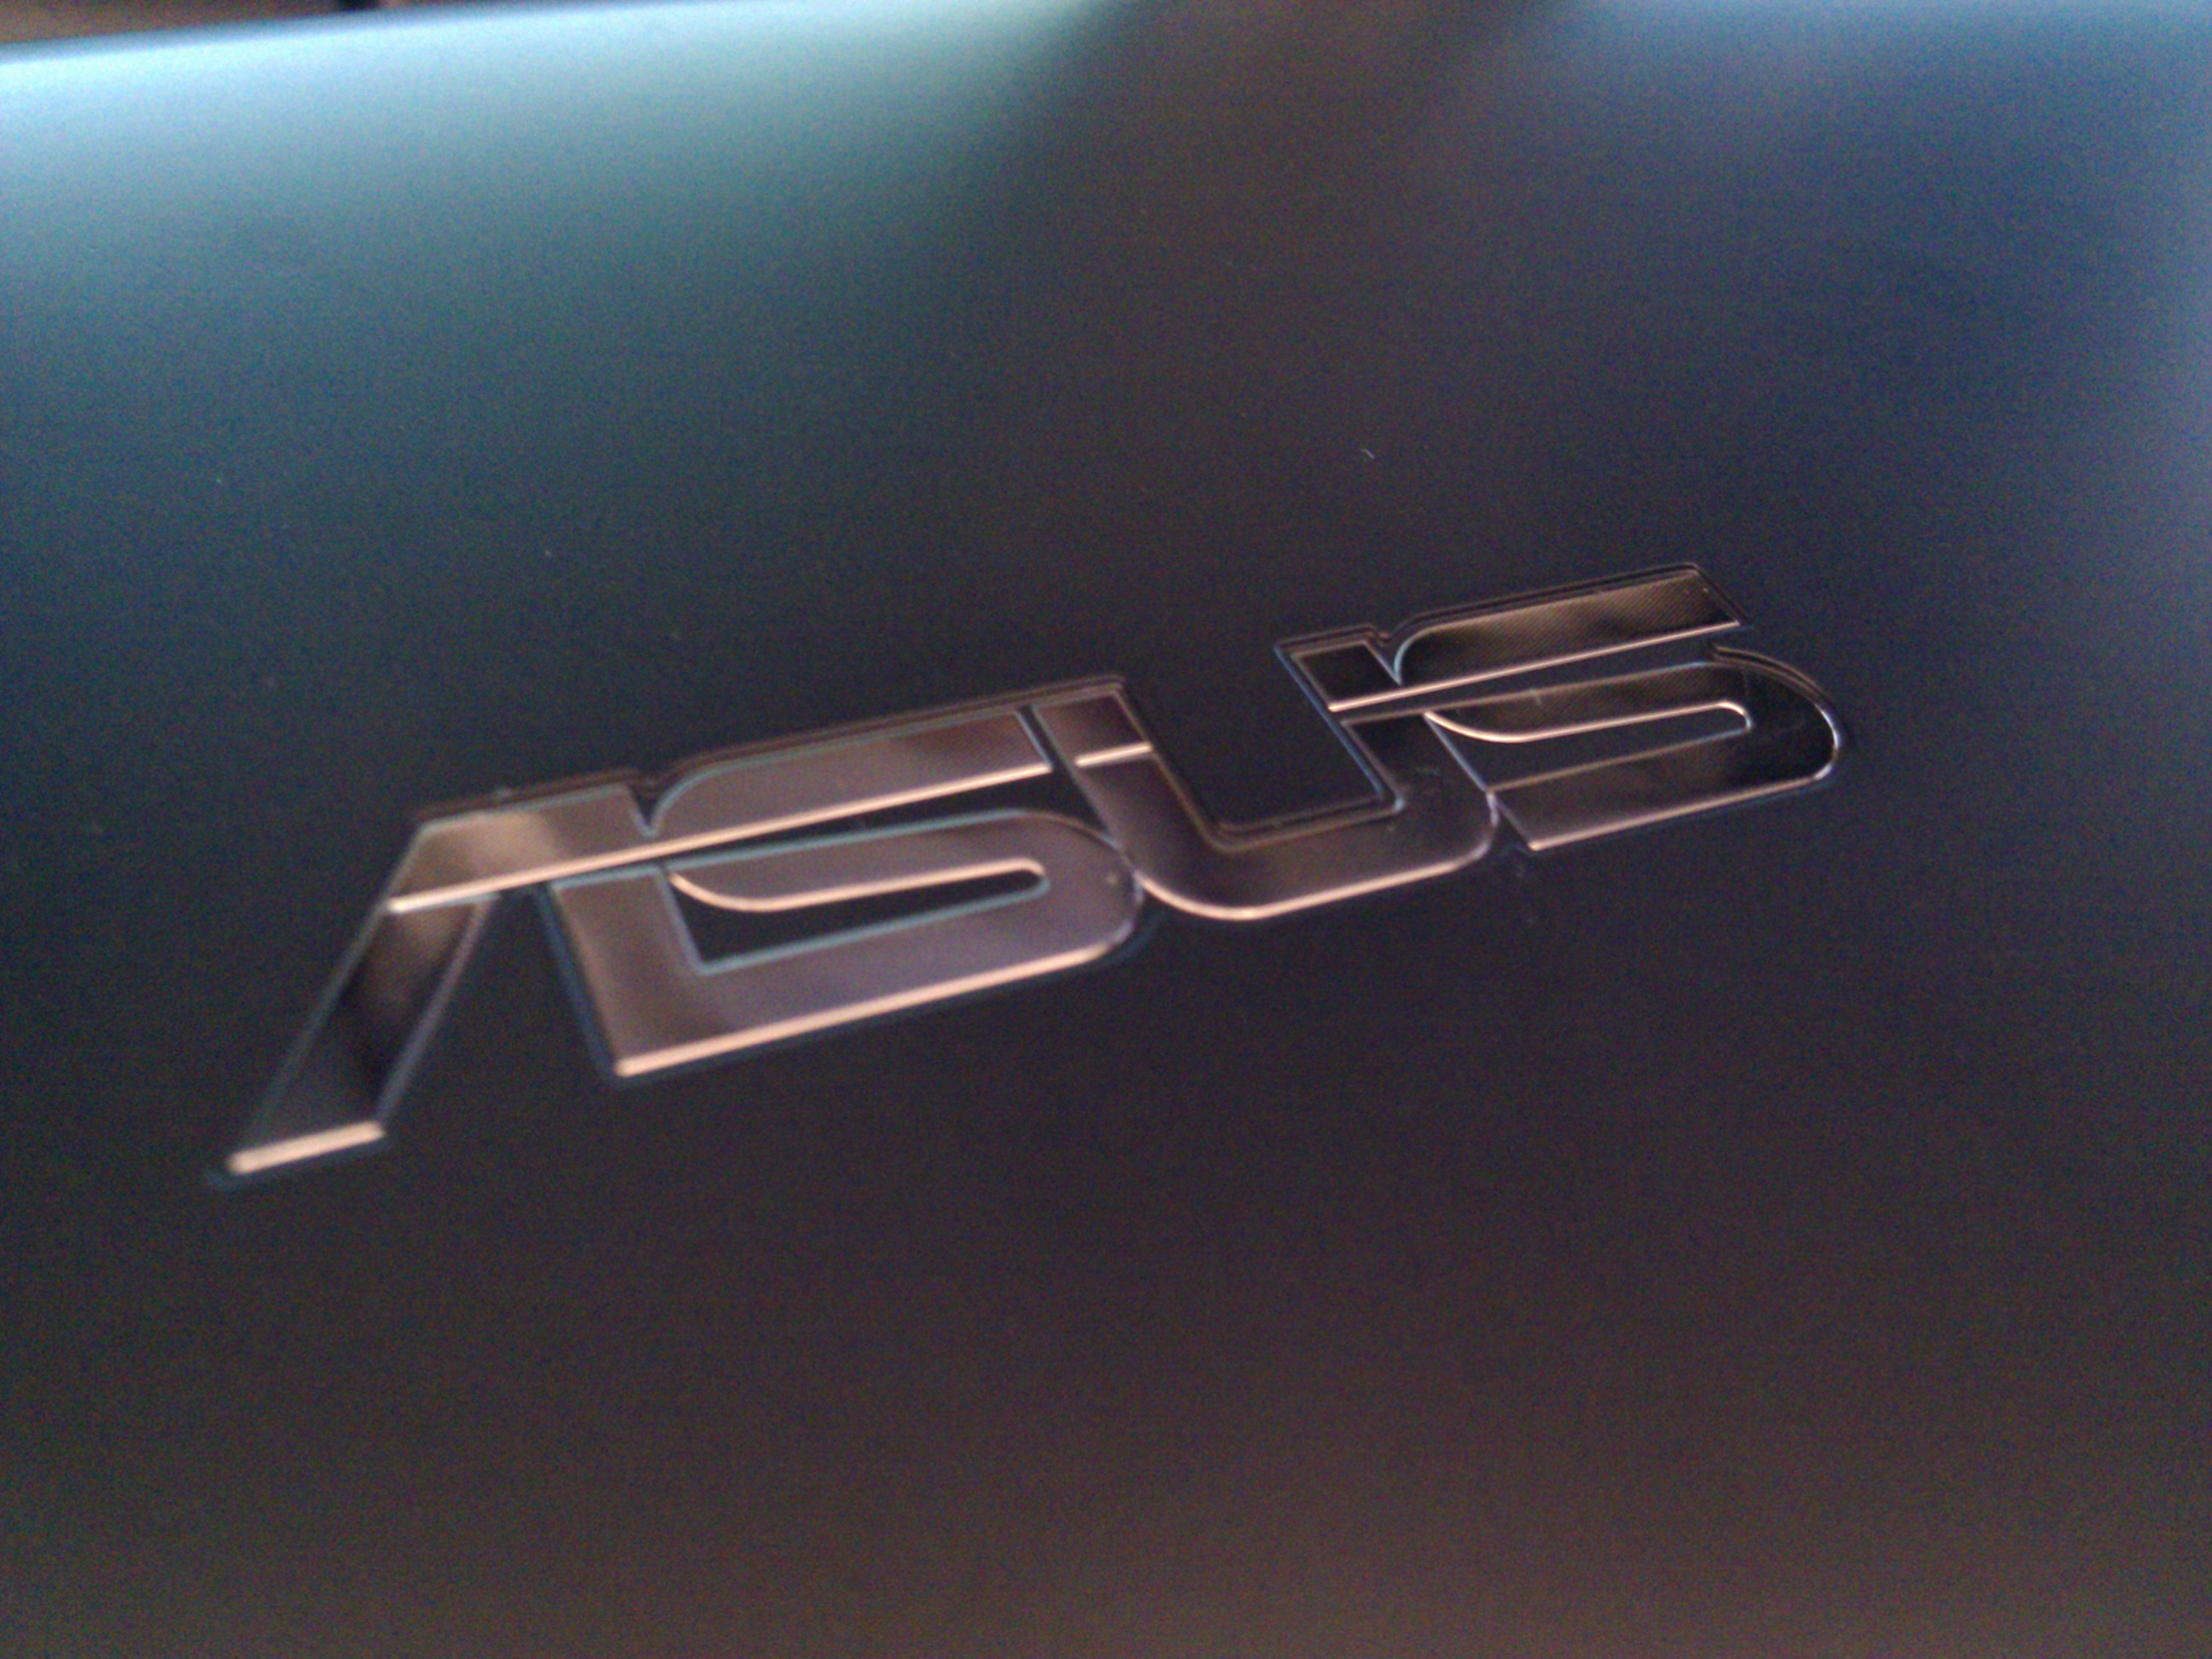 The top of the lid with Asus logo and matte black background